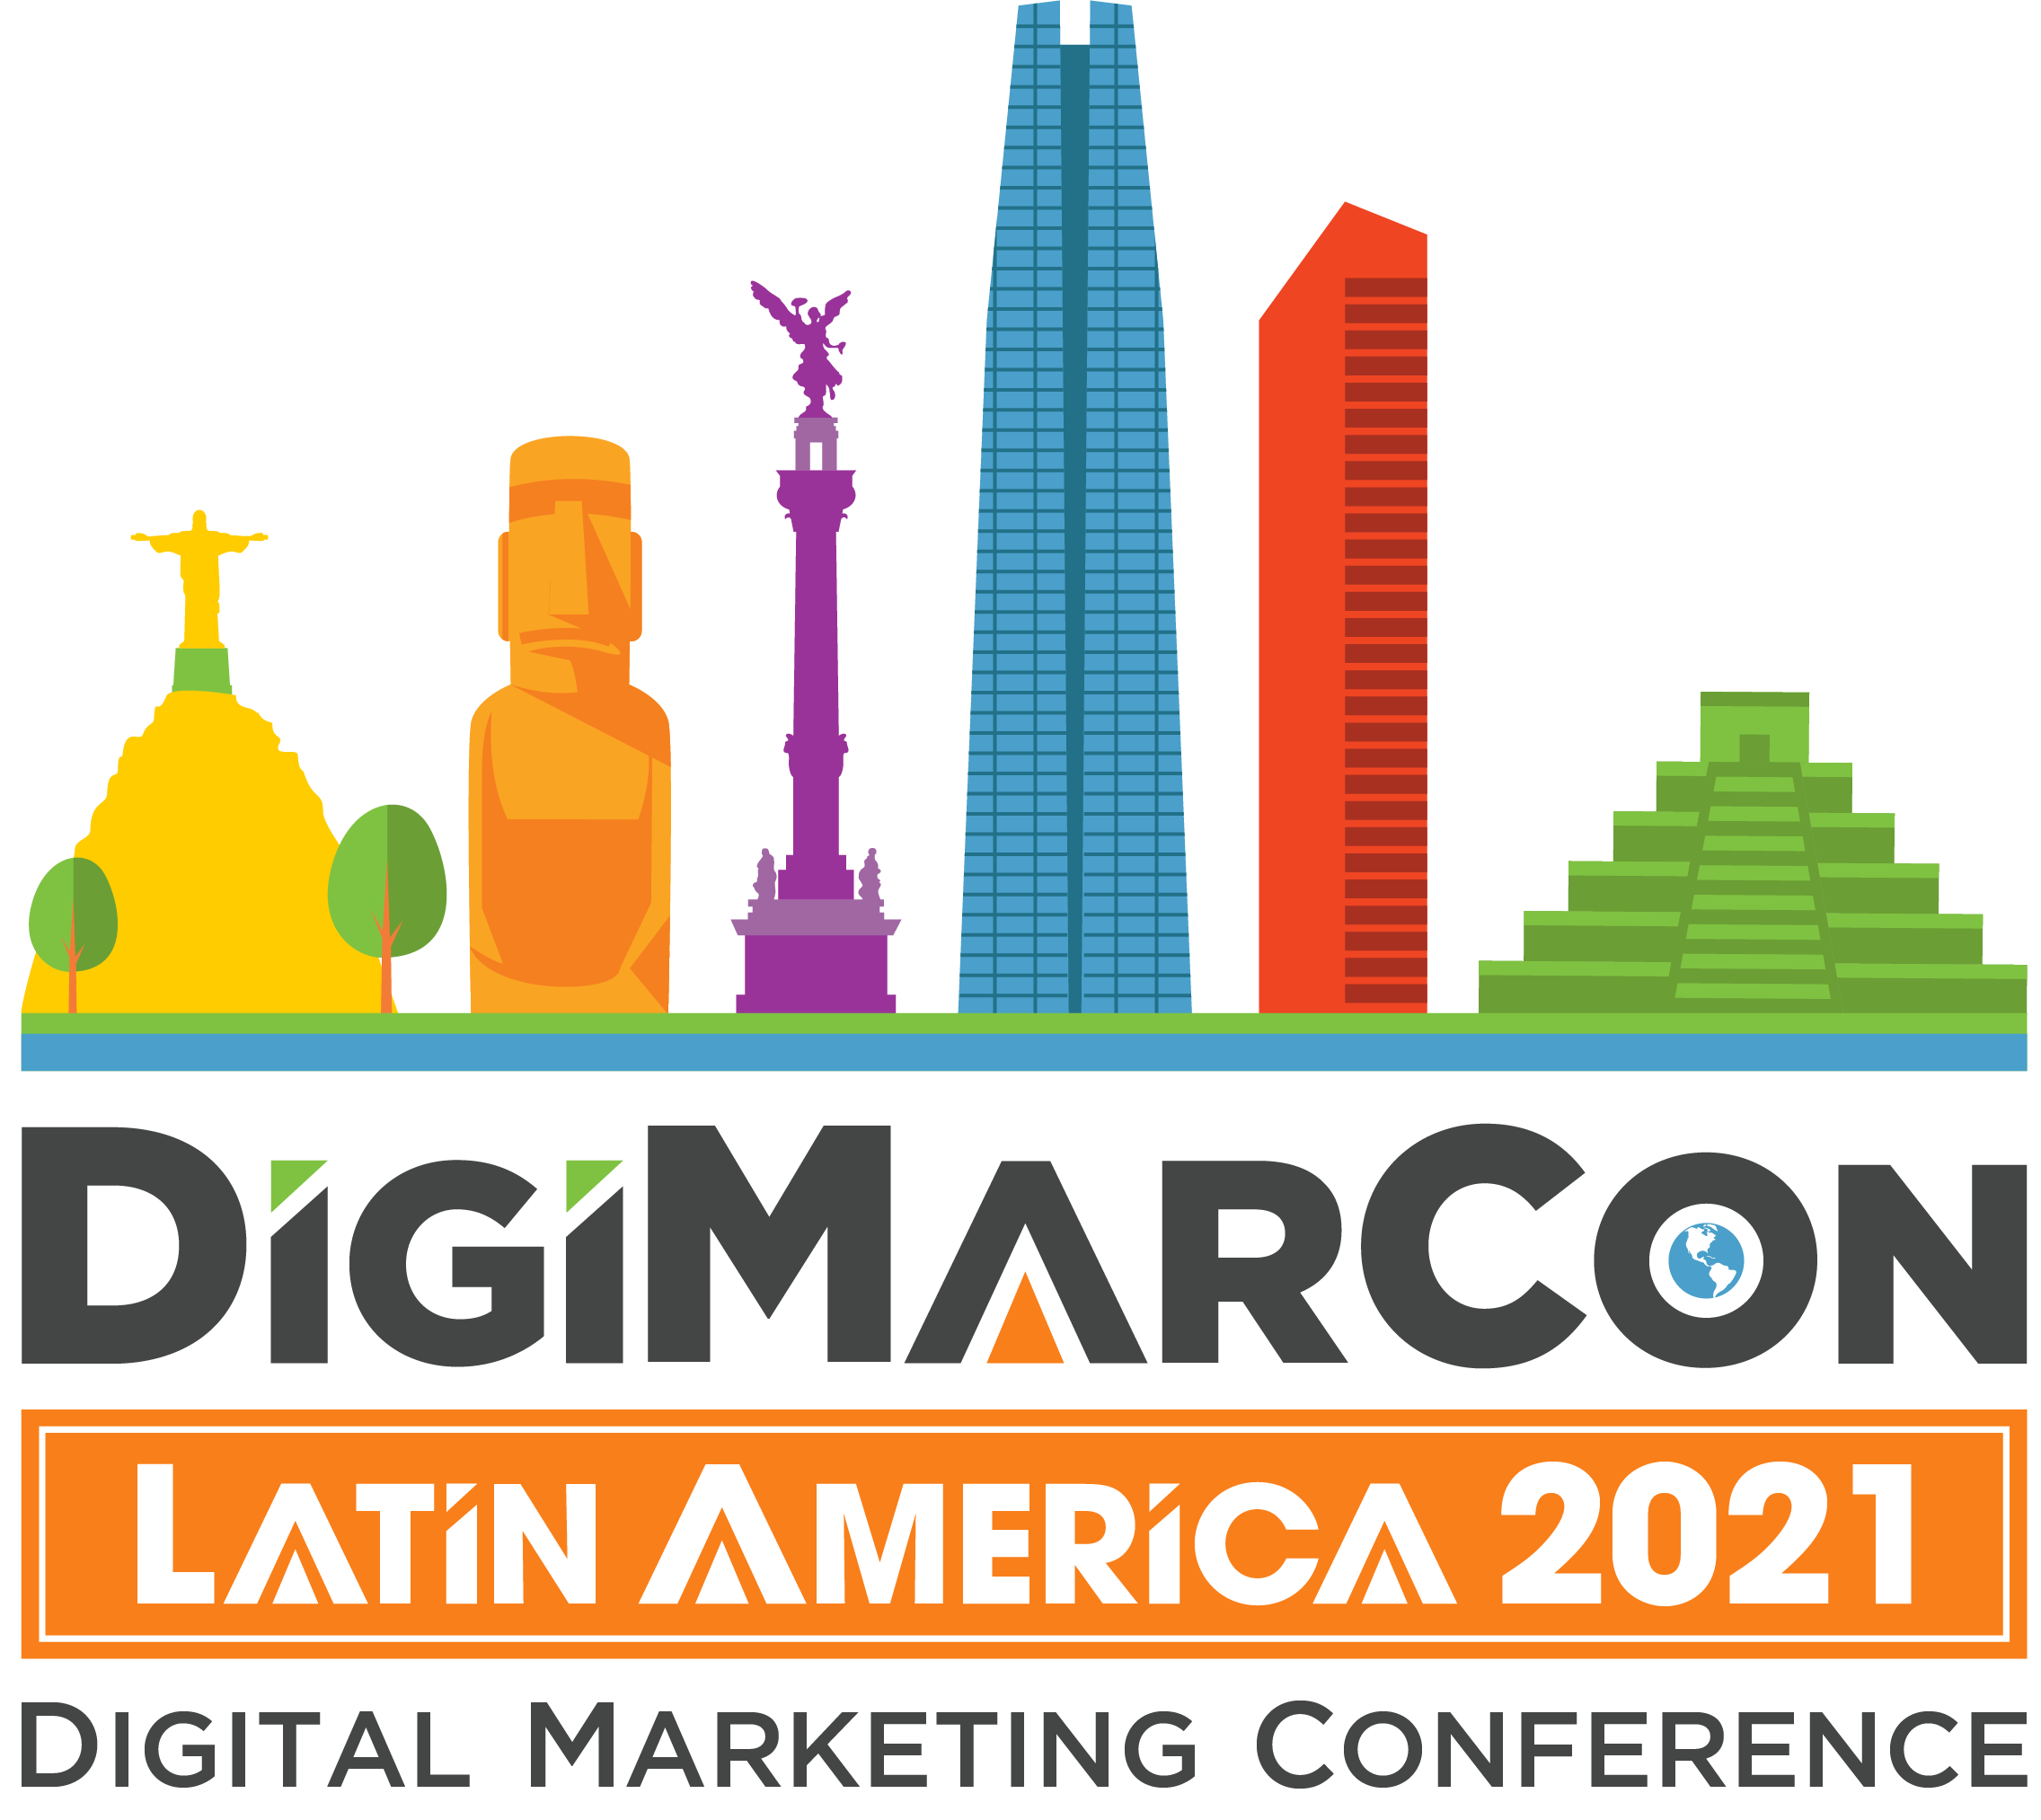 DigiMarCon Latin America 2021 - Digital Marketing, Media and Advertising Conference